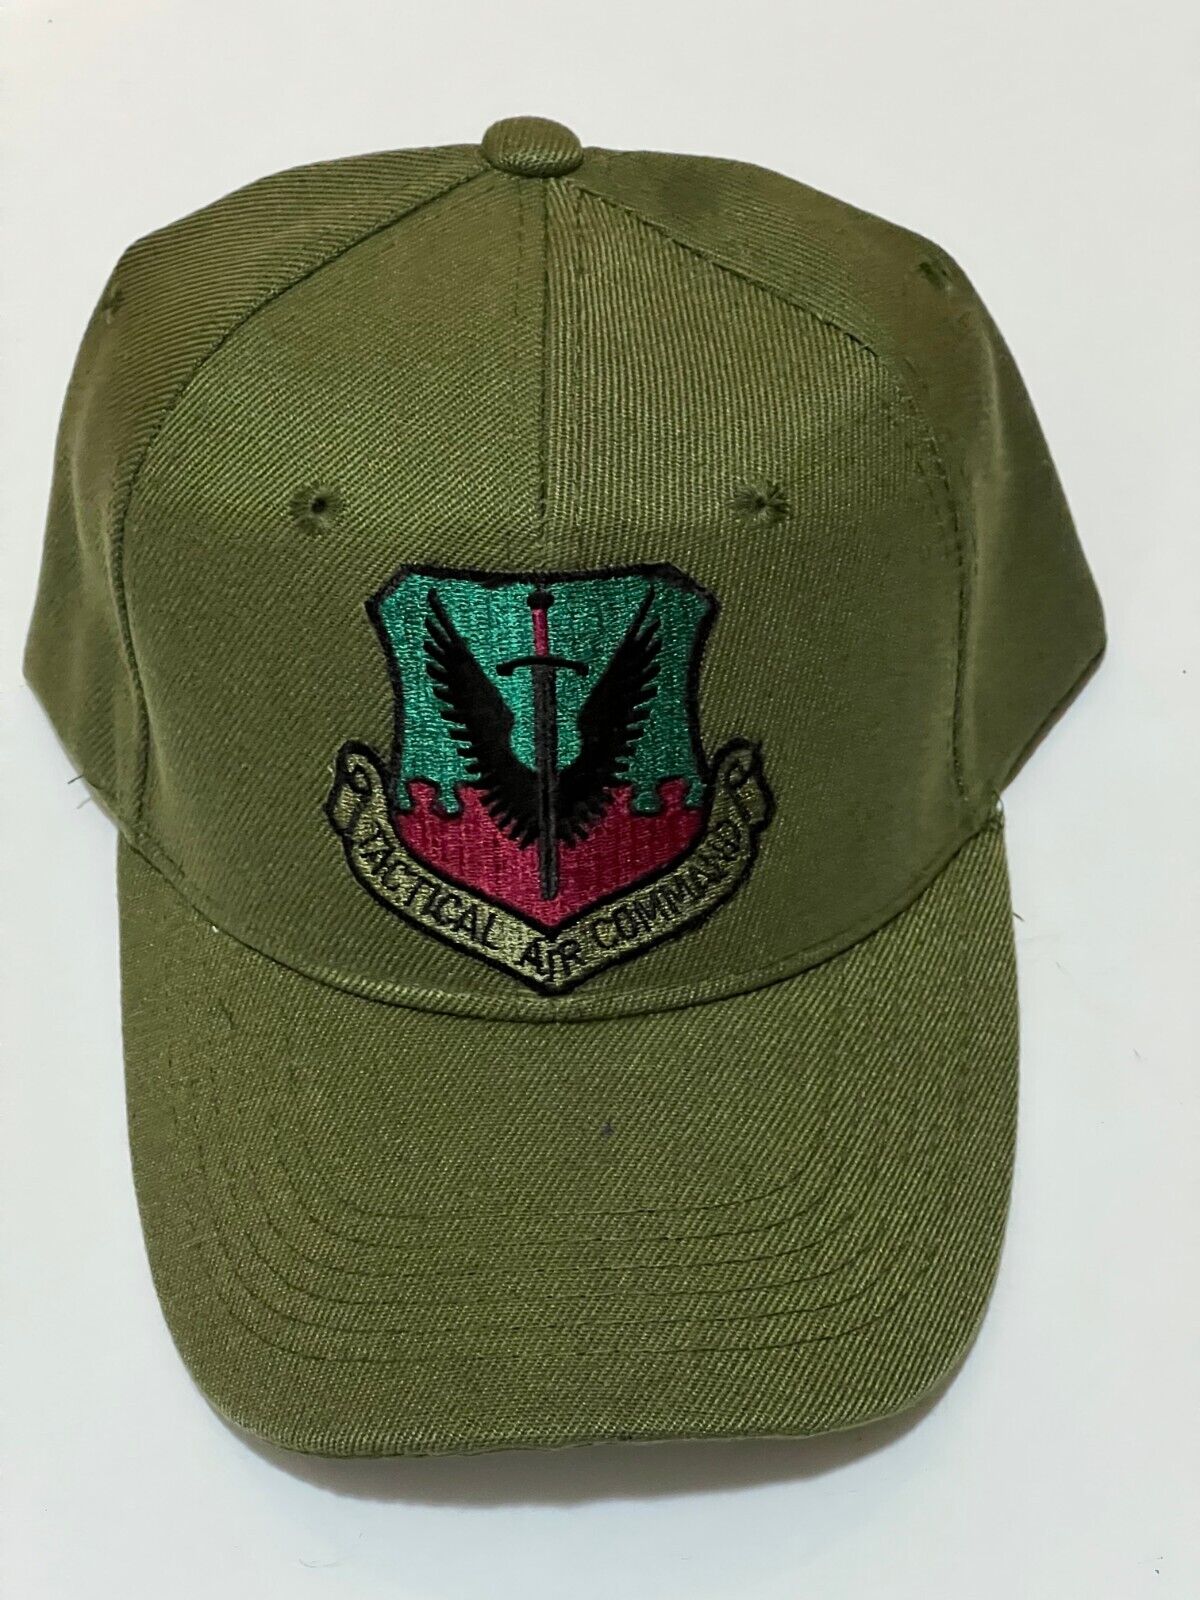 USAF TACTICAL AIR COMMAND GREEN SUBDUED MILTARY HAT/CAP